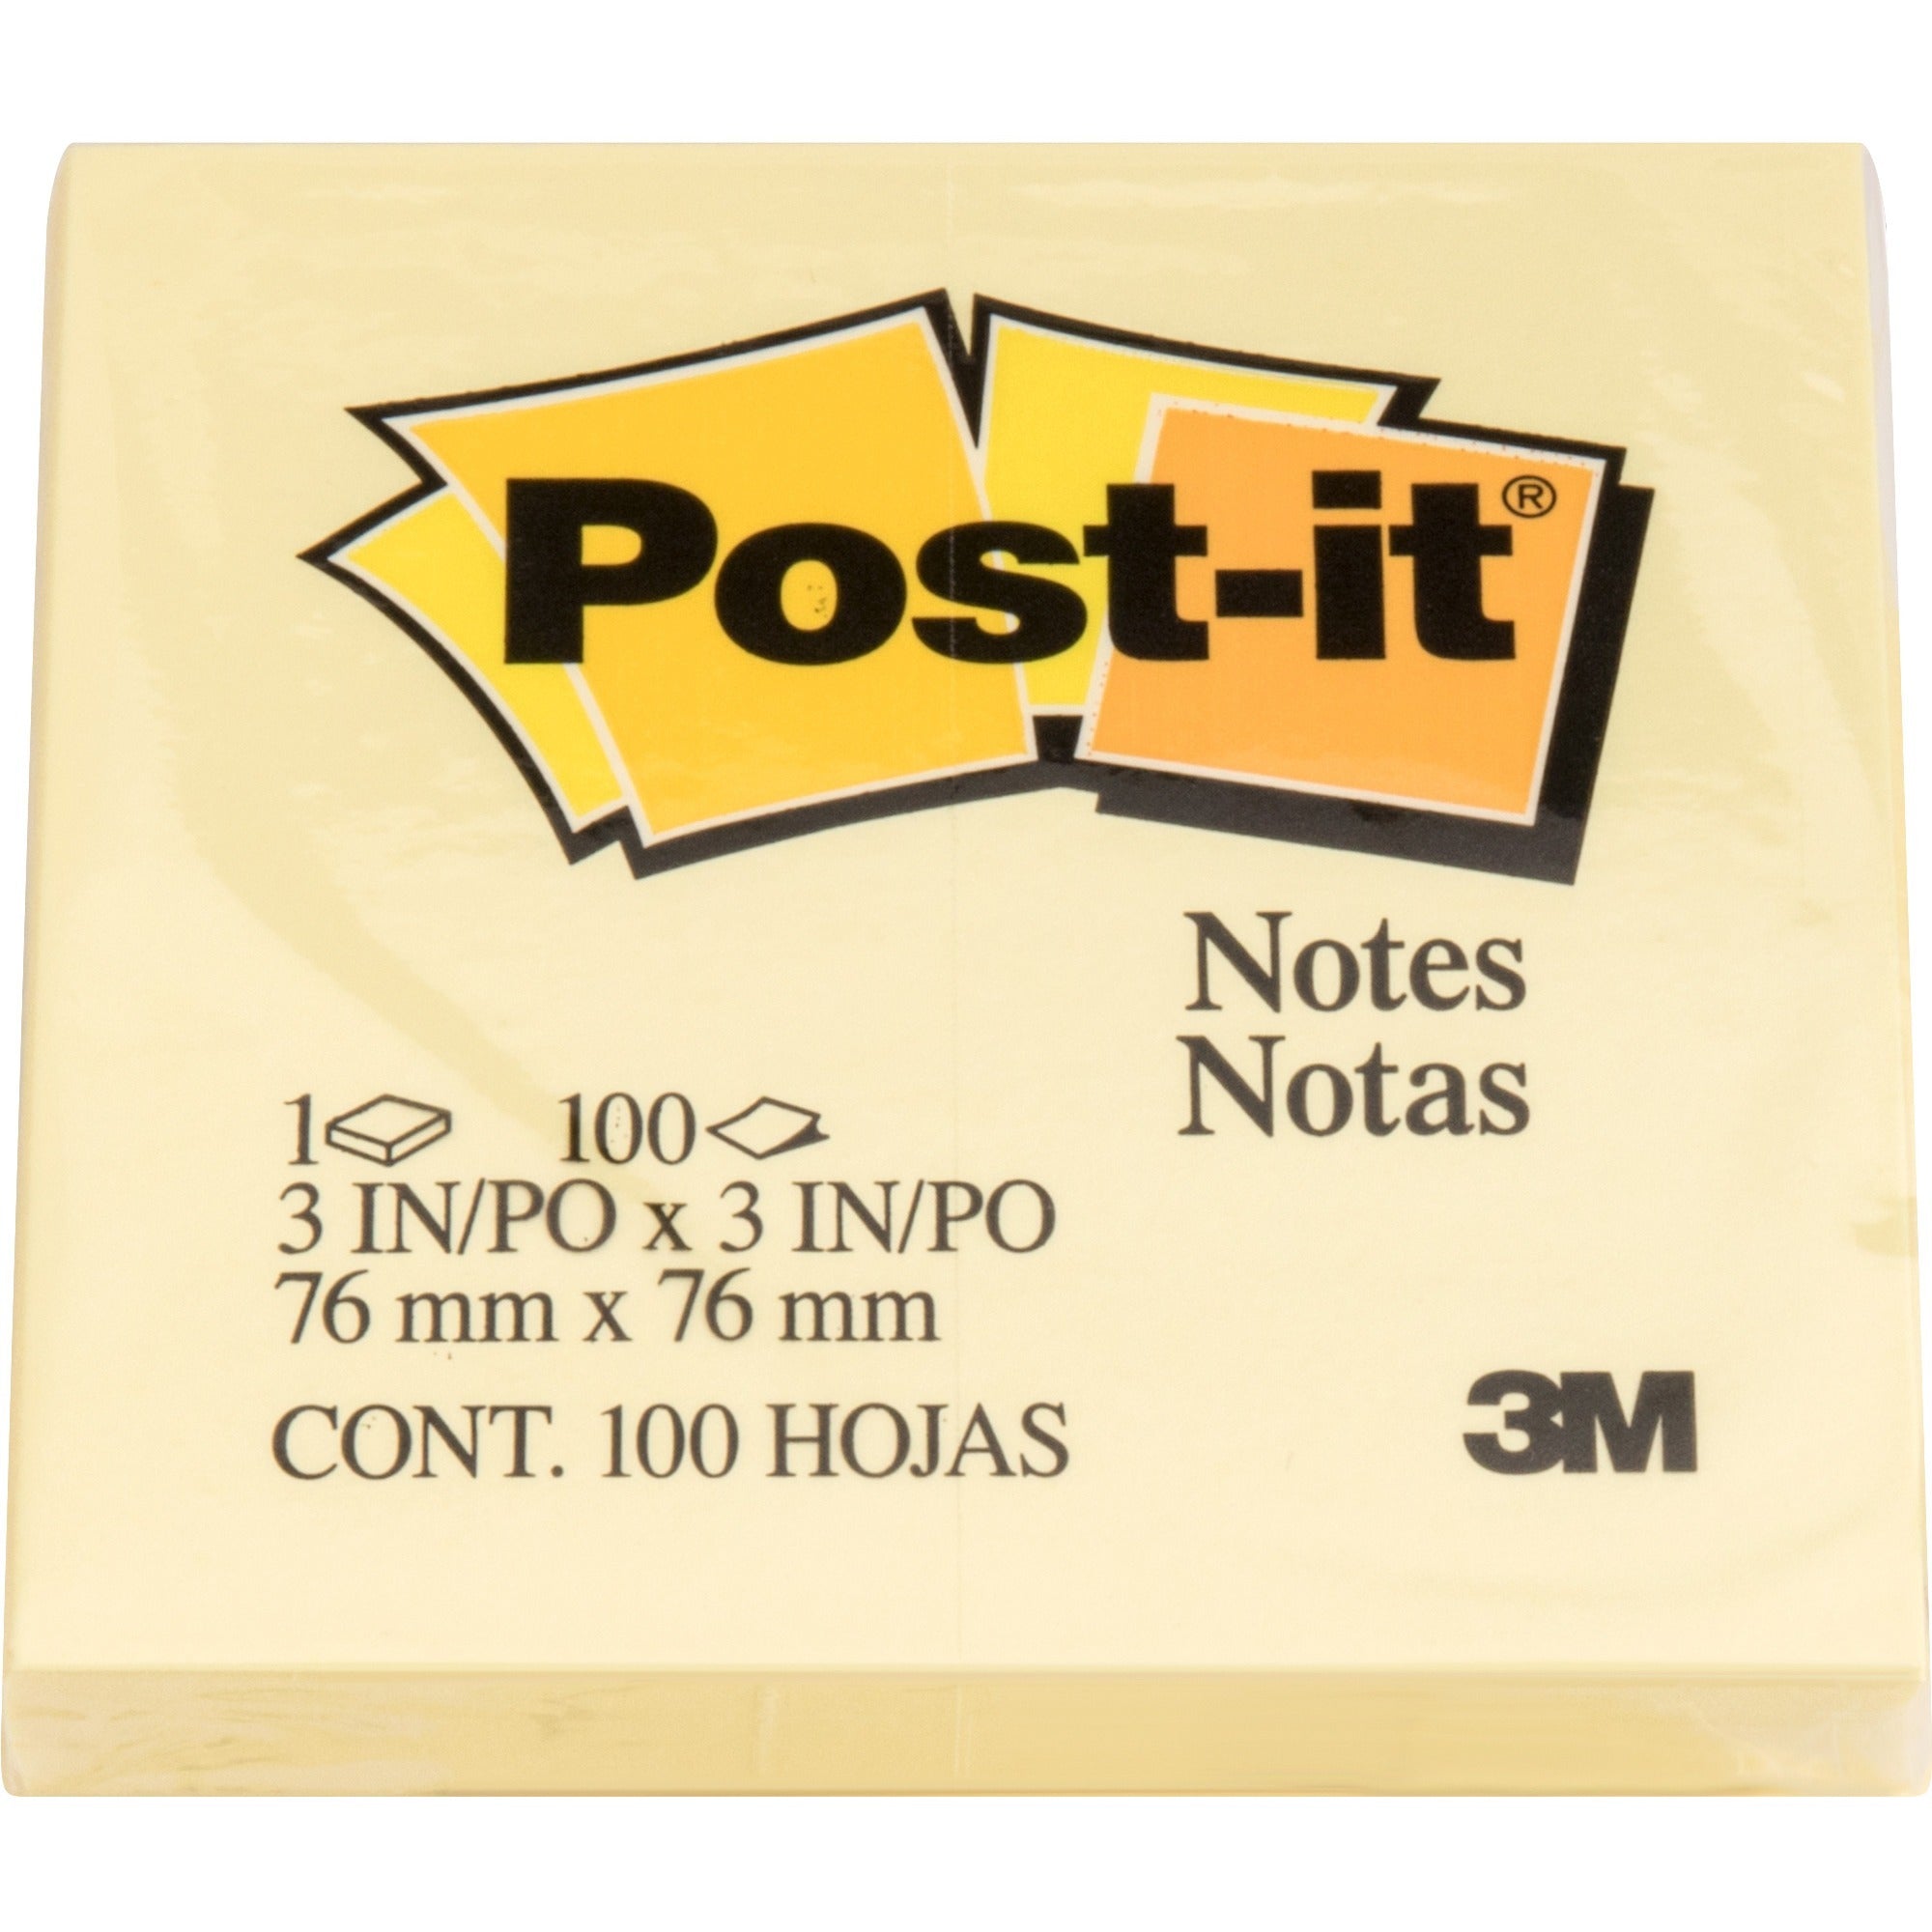 post-it-notes-original-notepads-3-x-3-square-100-sheets-per-pad-unruled-canary-yellow-paper-self-adhesive-repositionable-24-bundle_mmm654ywbd - 2